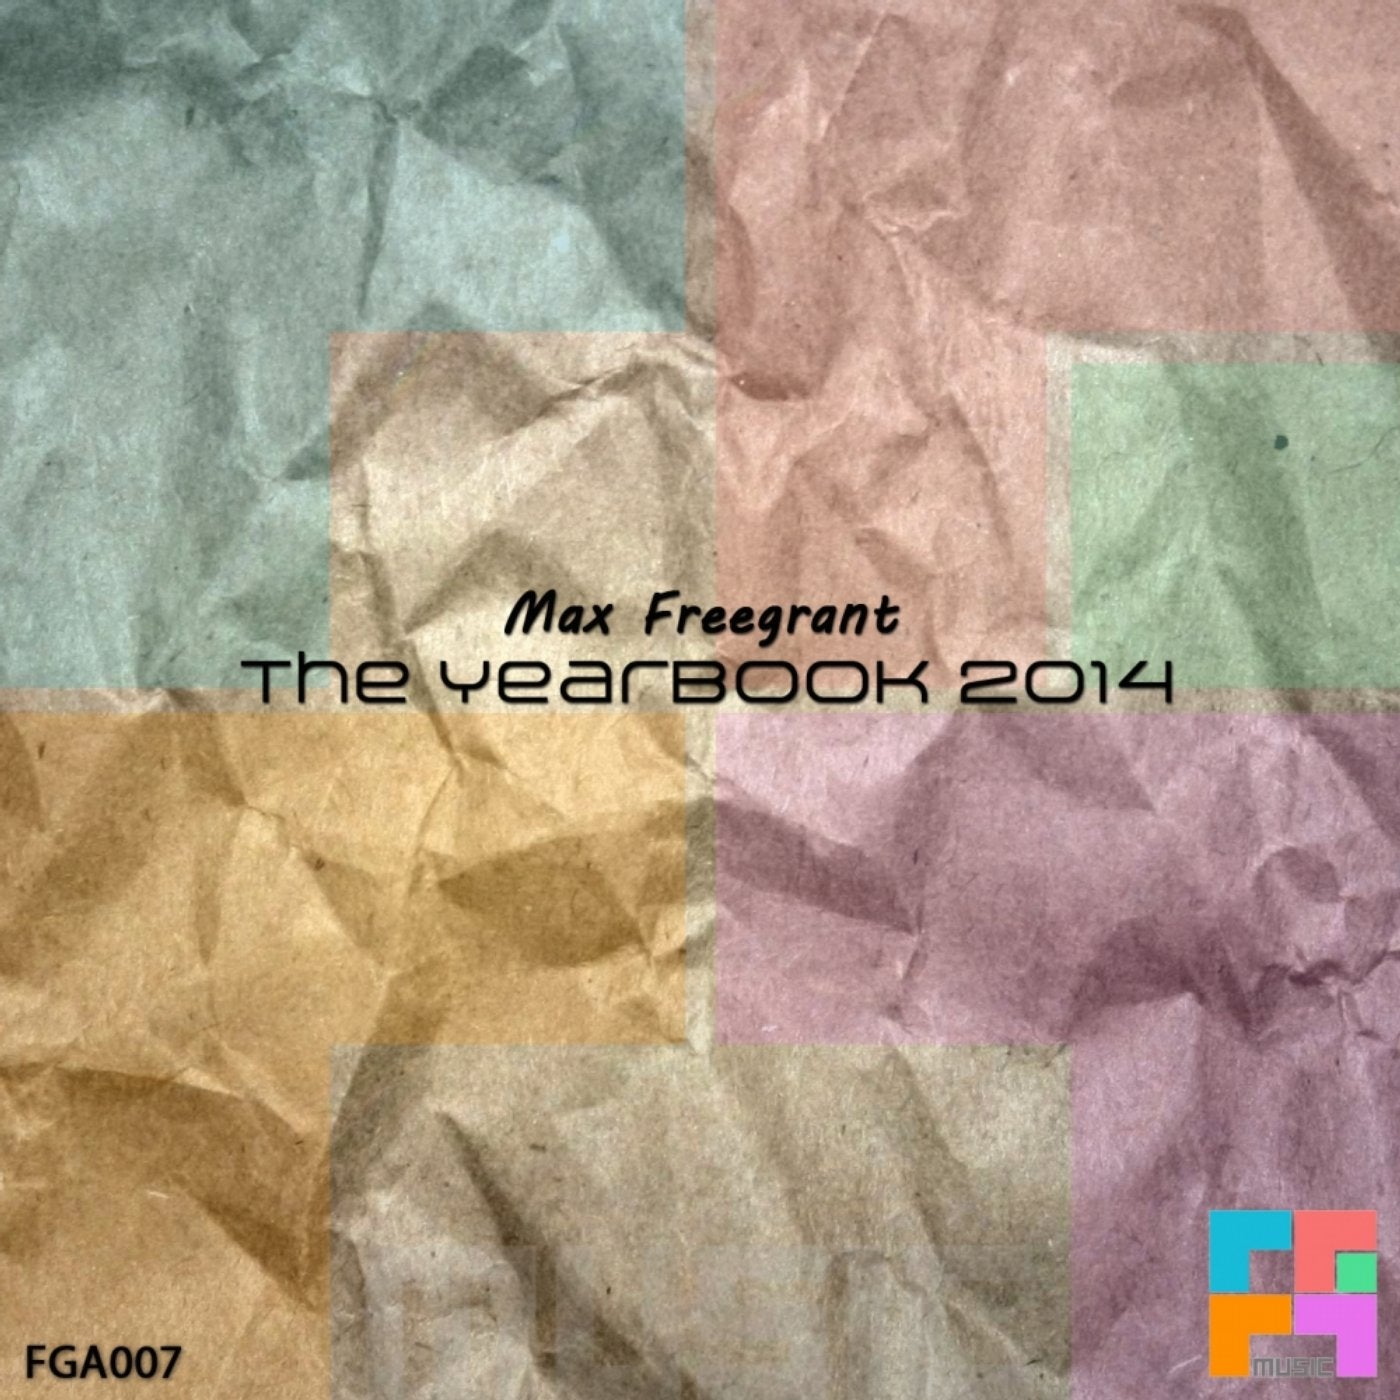 The Yearbook 2014